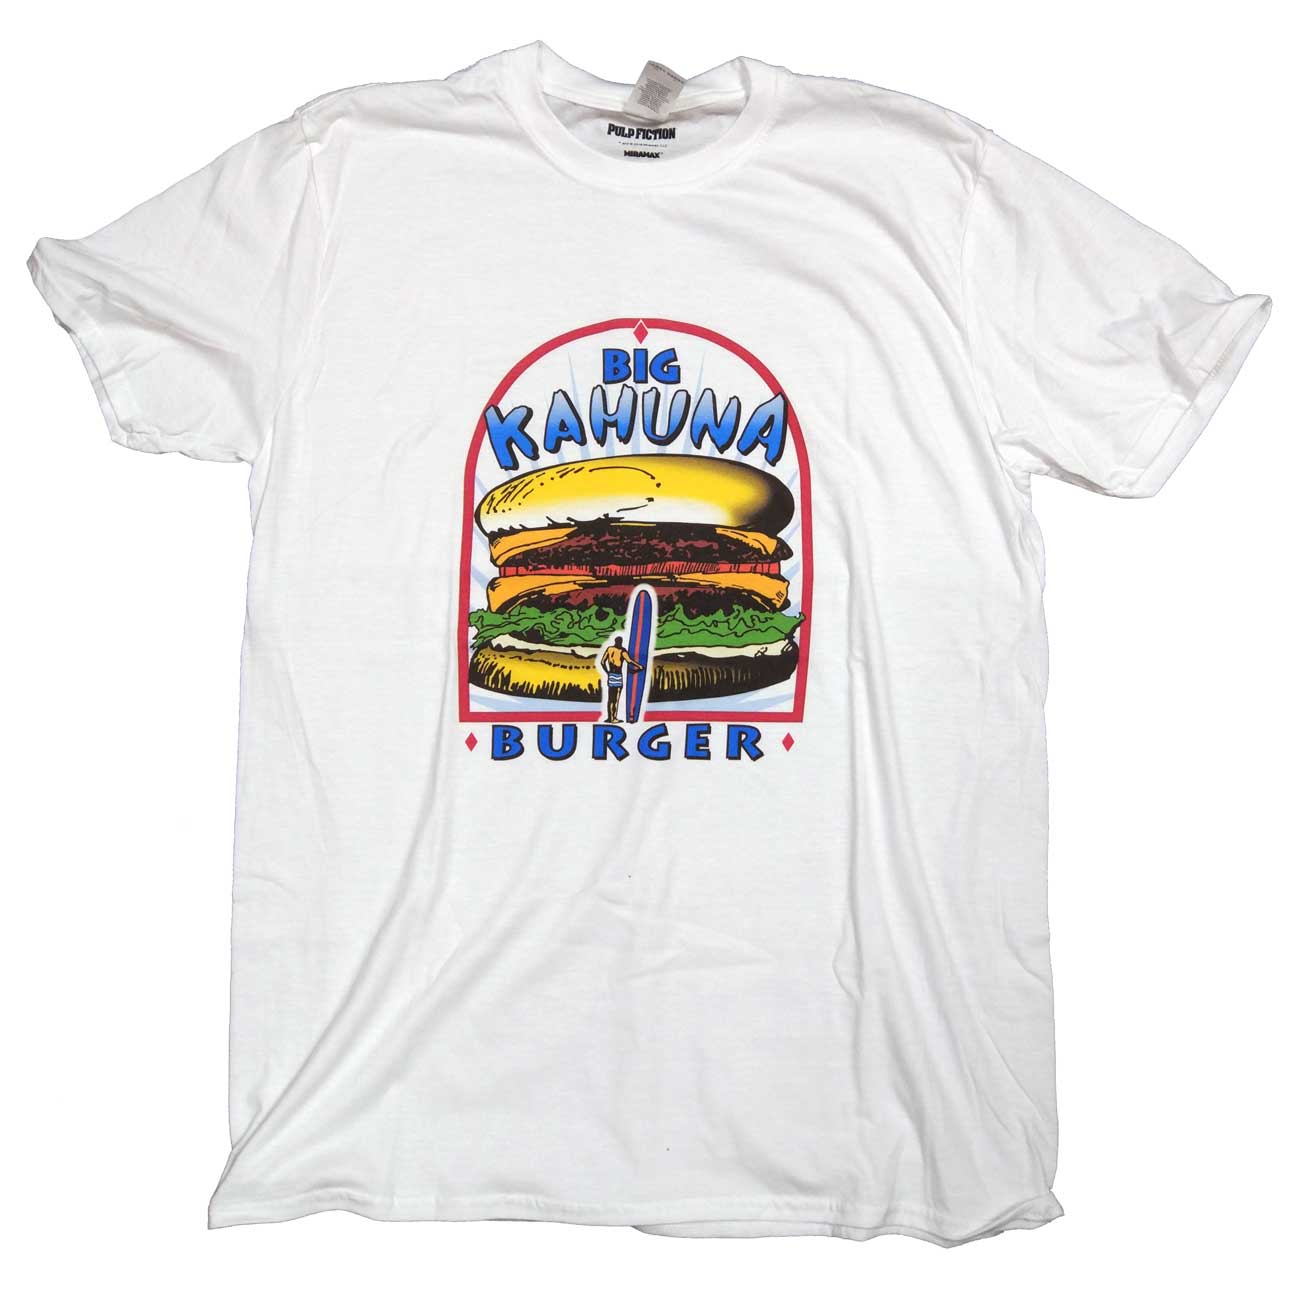 Pulp Fiction T Shirt - Big Kahuna Burger 100% Officially Licensed